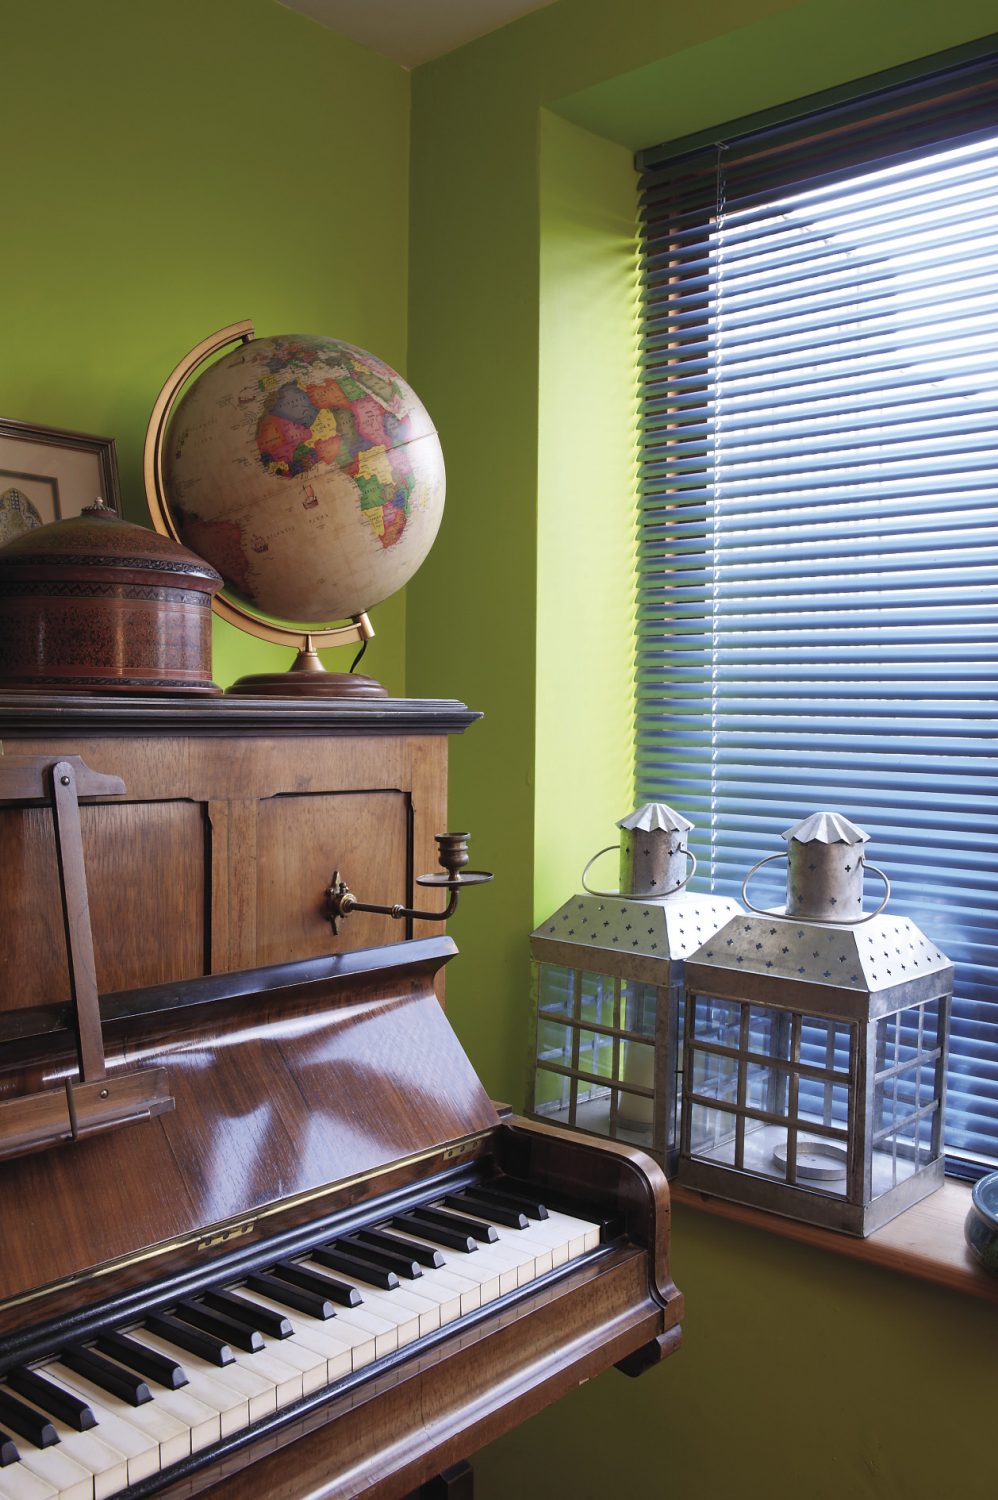 The study, home to Oliver’s floor-to-ceiling CD shelves, is painted a zingy lime green